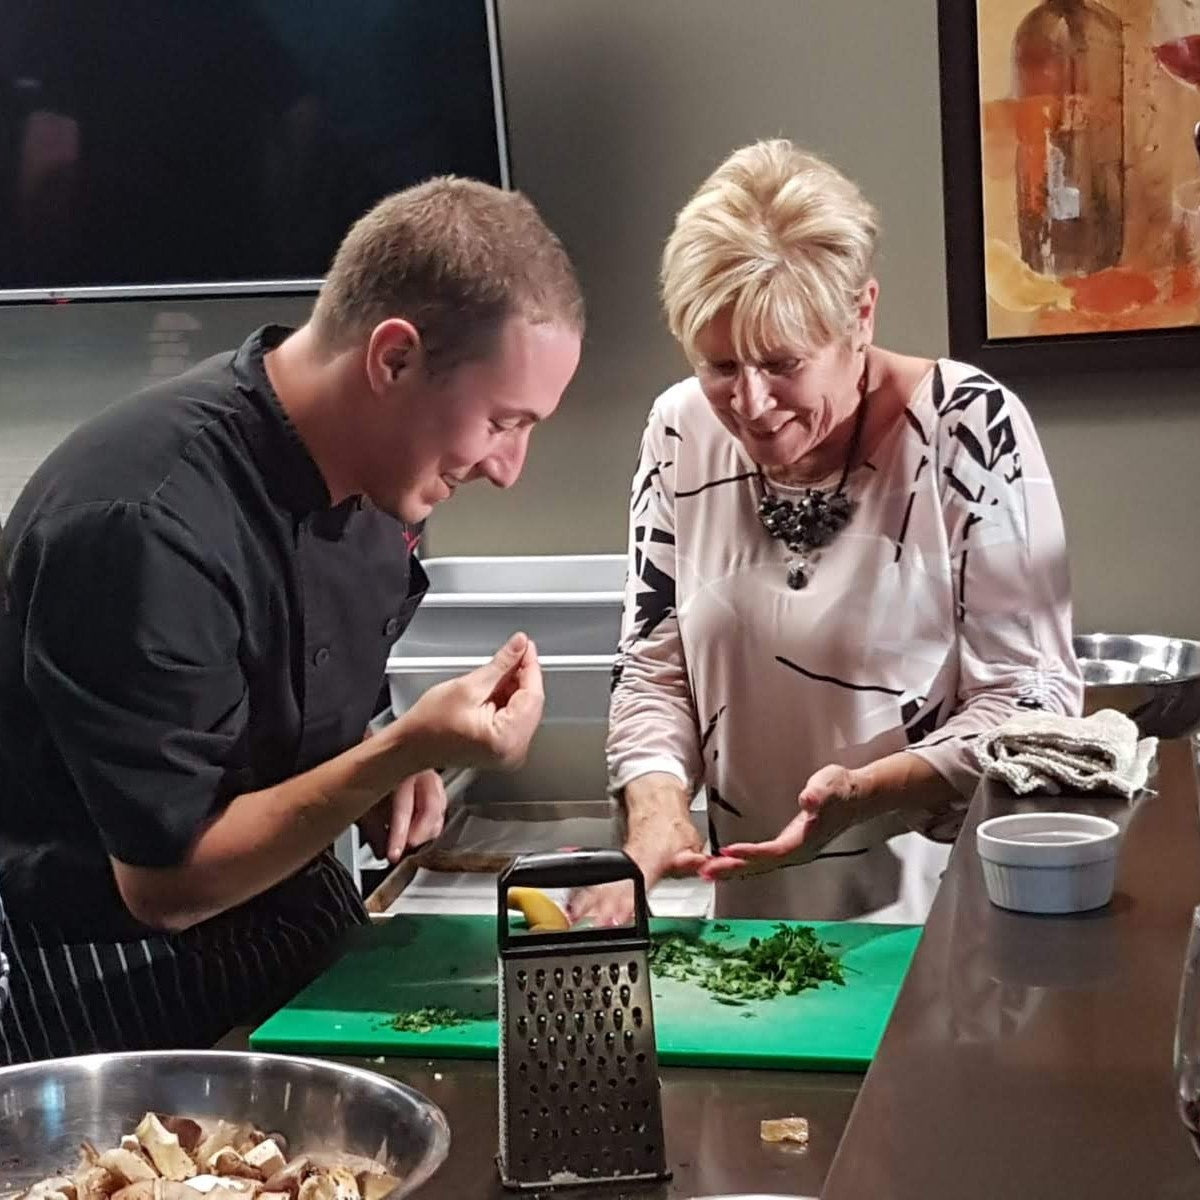 Midtown - Food Lover's 5-Course Cooking Class: A Night with Nonna